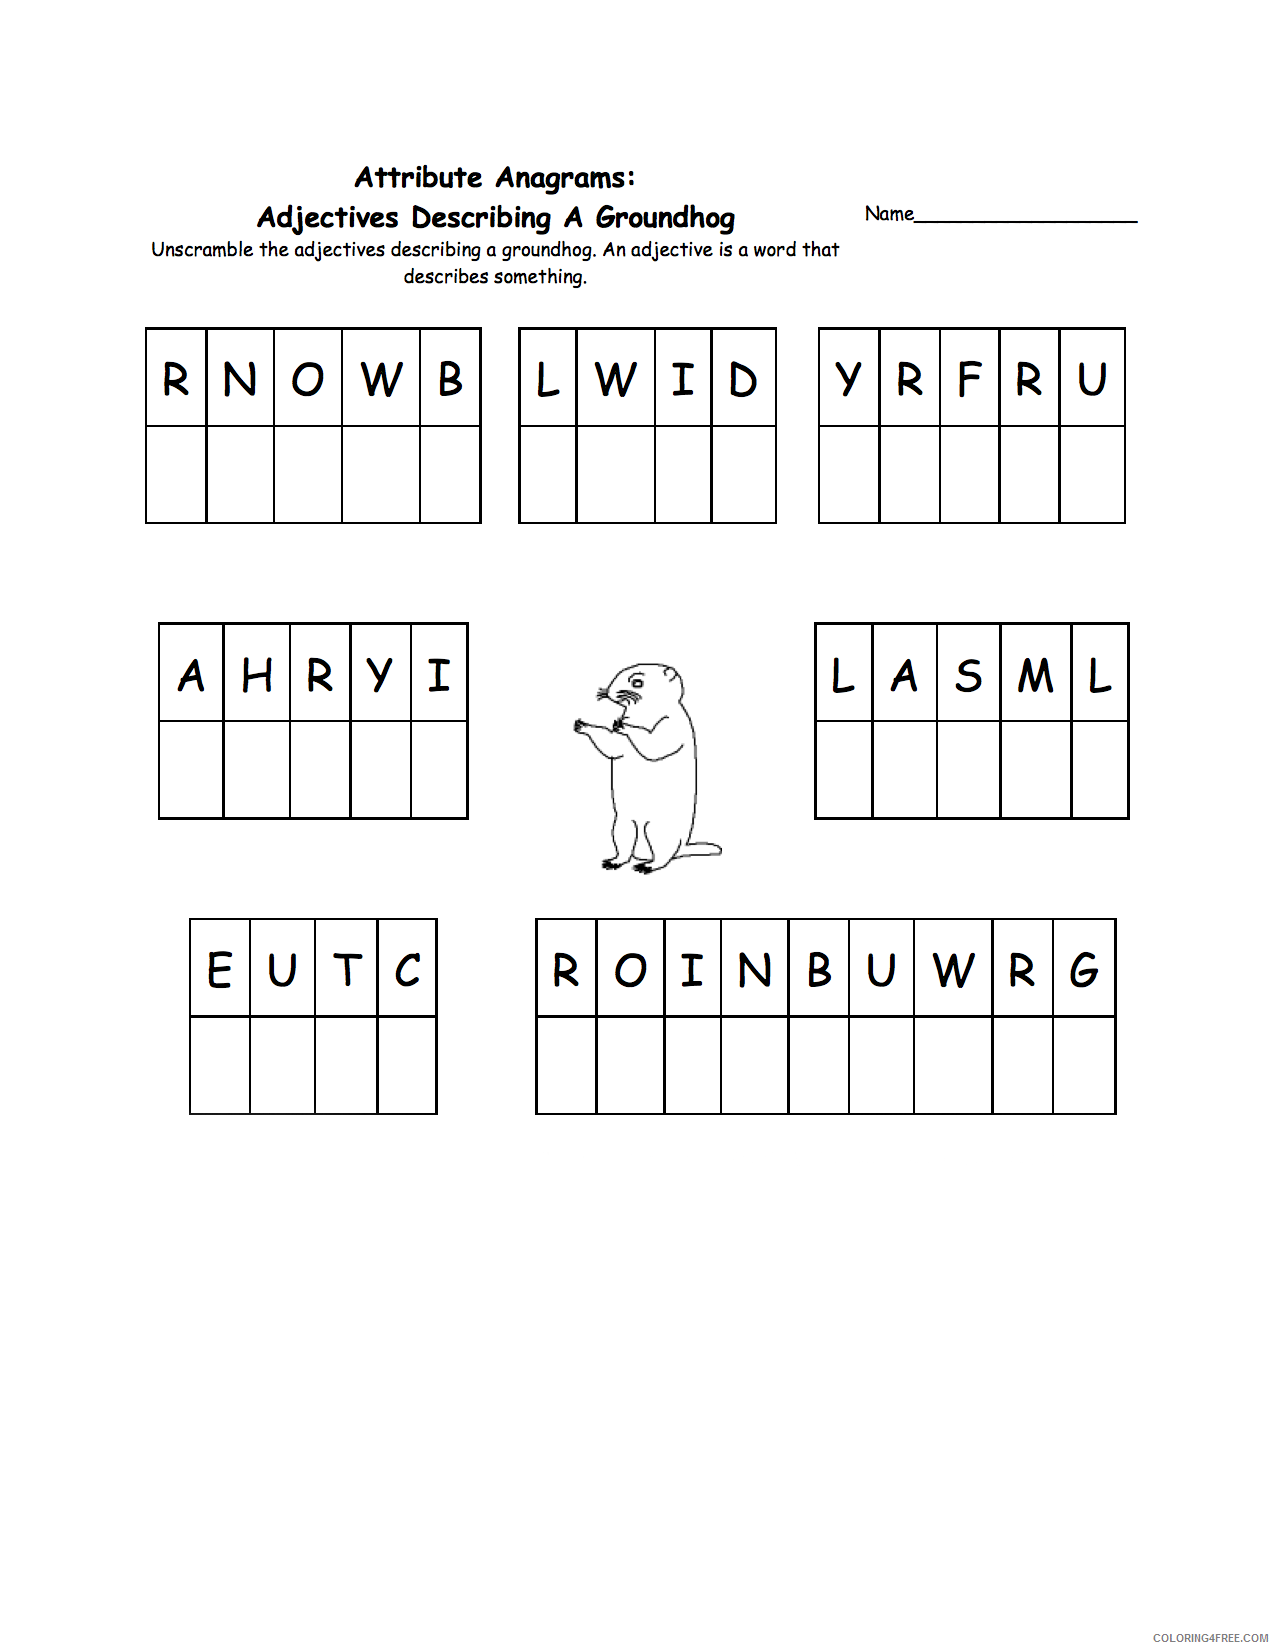 Groundhog Day Coloring Pages Holiday Groundhog Day Abjective Worksheets Printable 2021 0575 Coloring4free